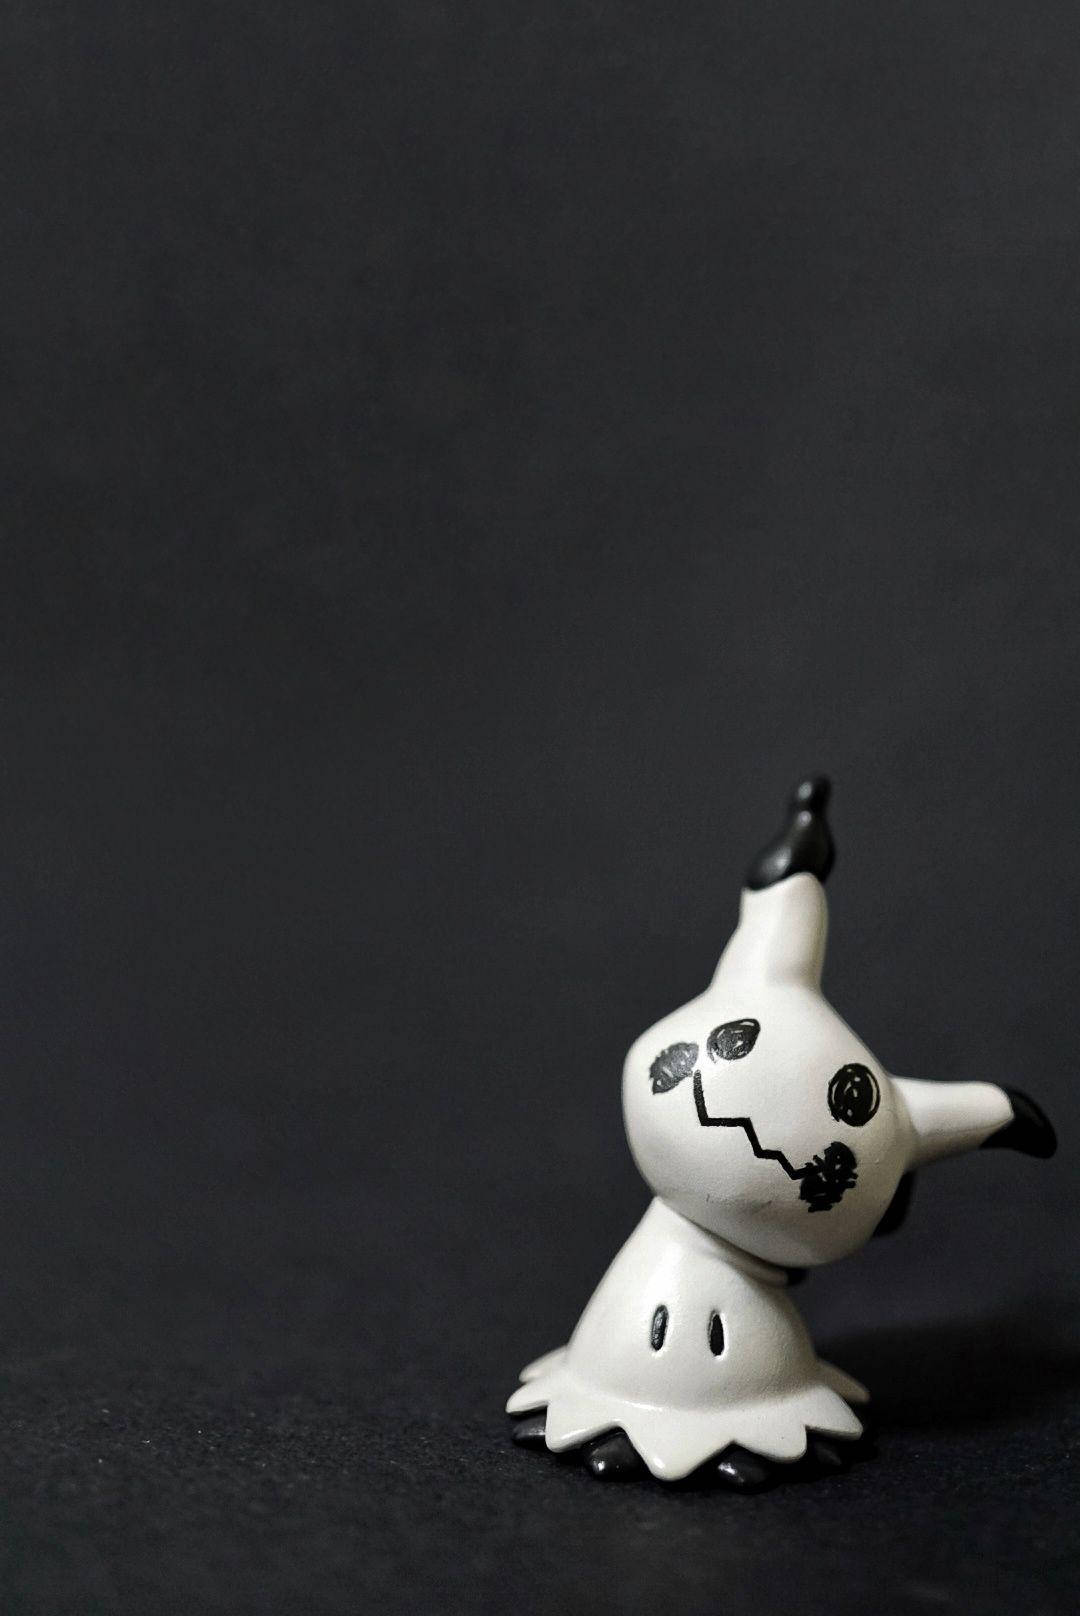 A Small Figurine Of A Ghost Sitting On A Black Surface Background